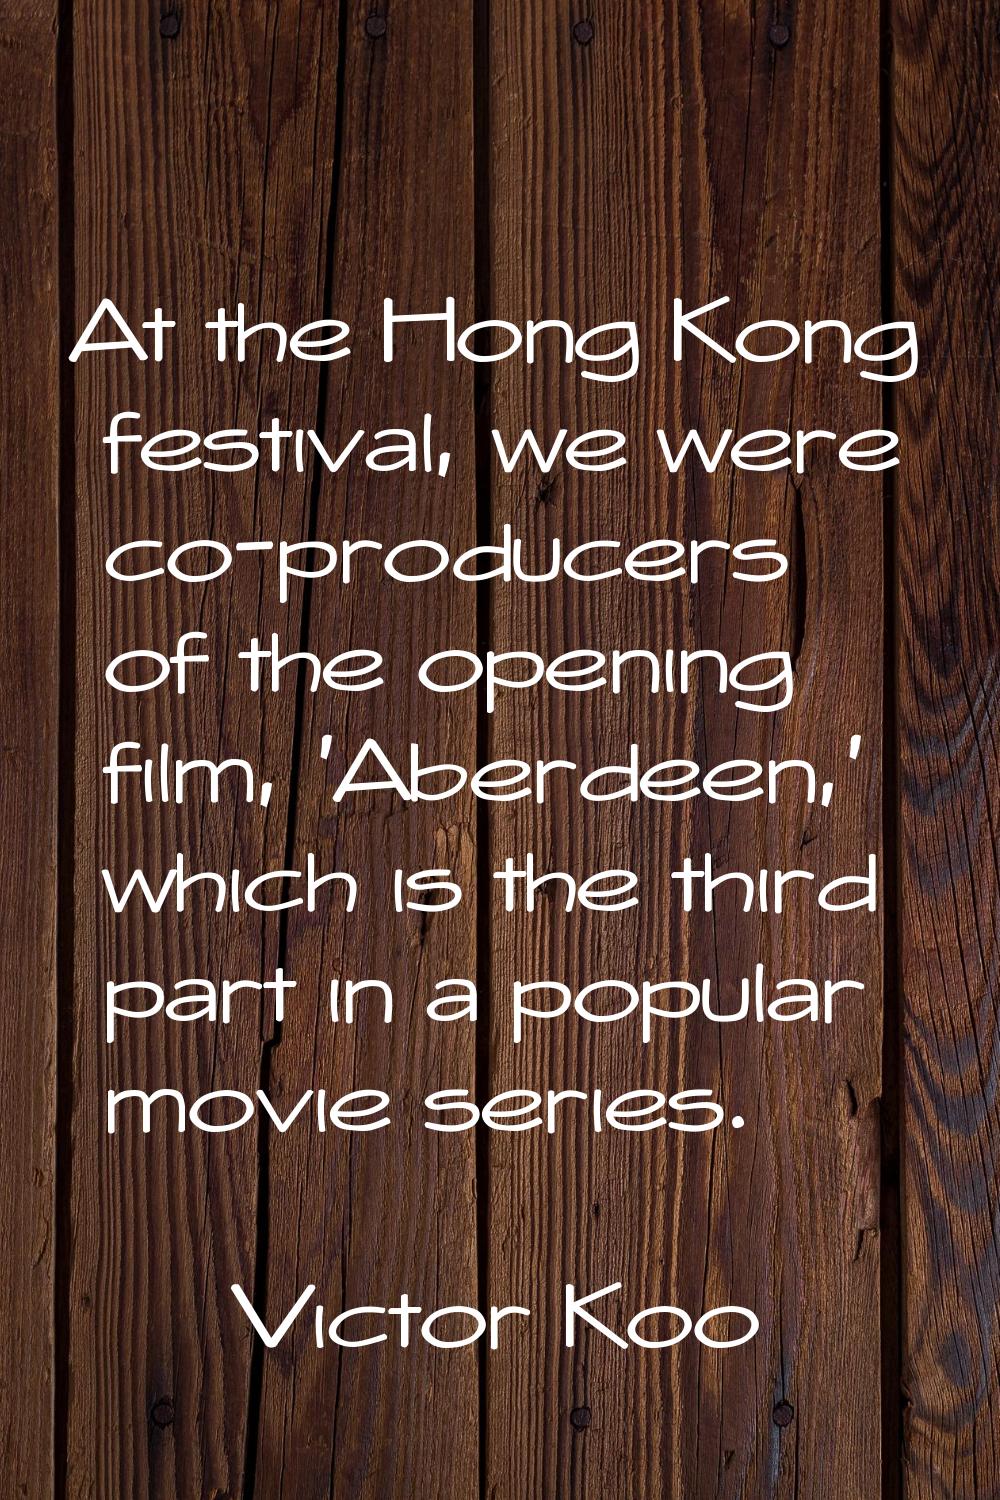 At the Hong Kong festival, we were co-producers of the opening film, 'Aberdeen,' which is the third